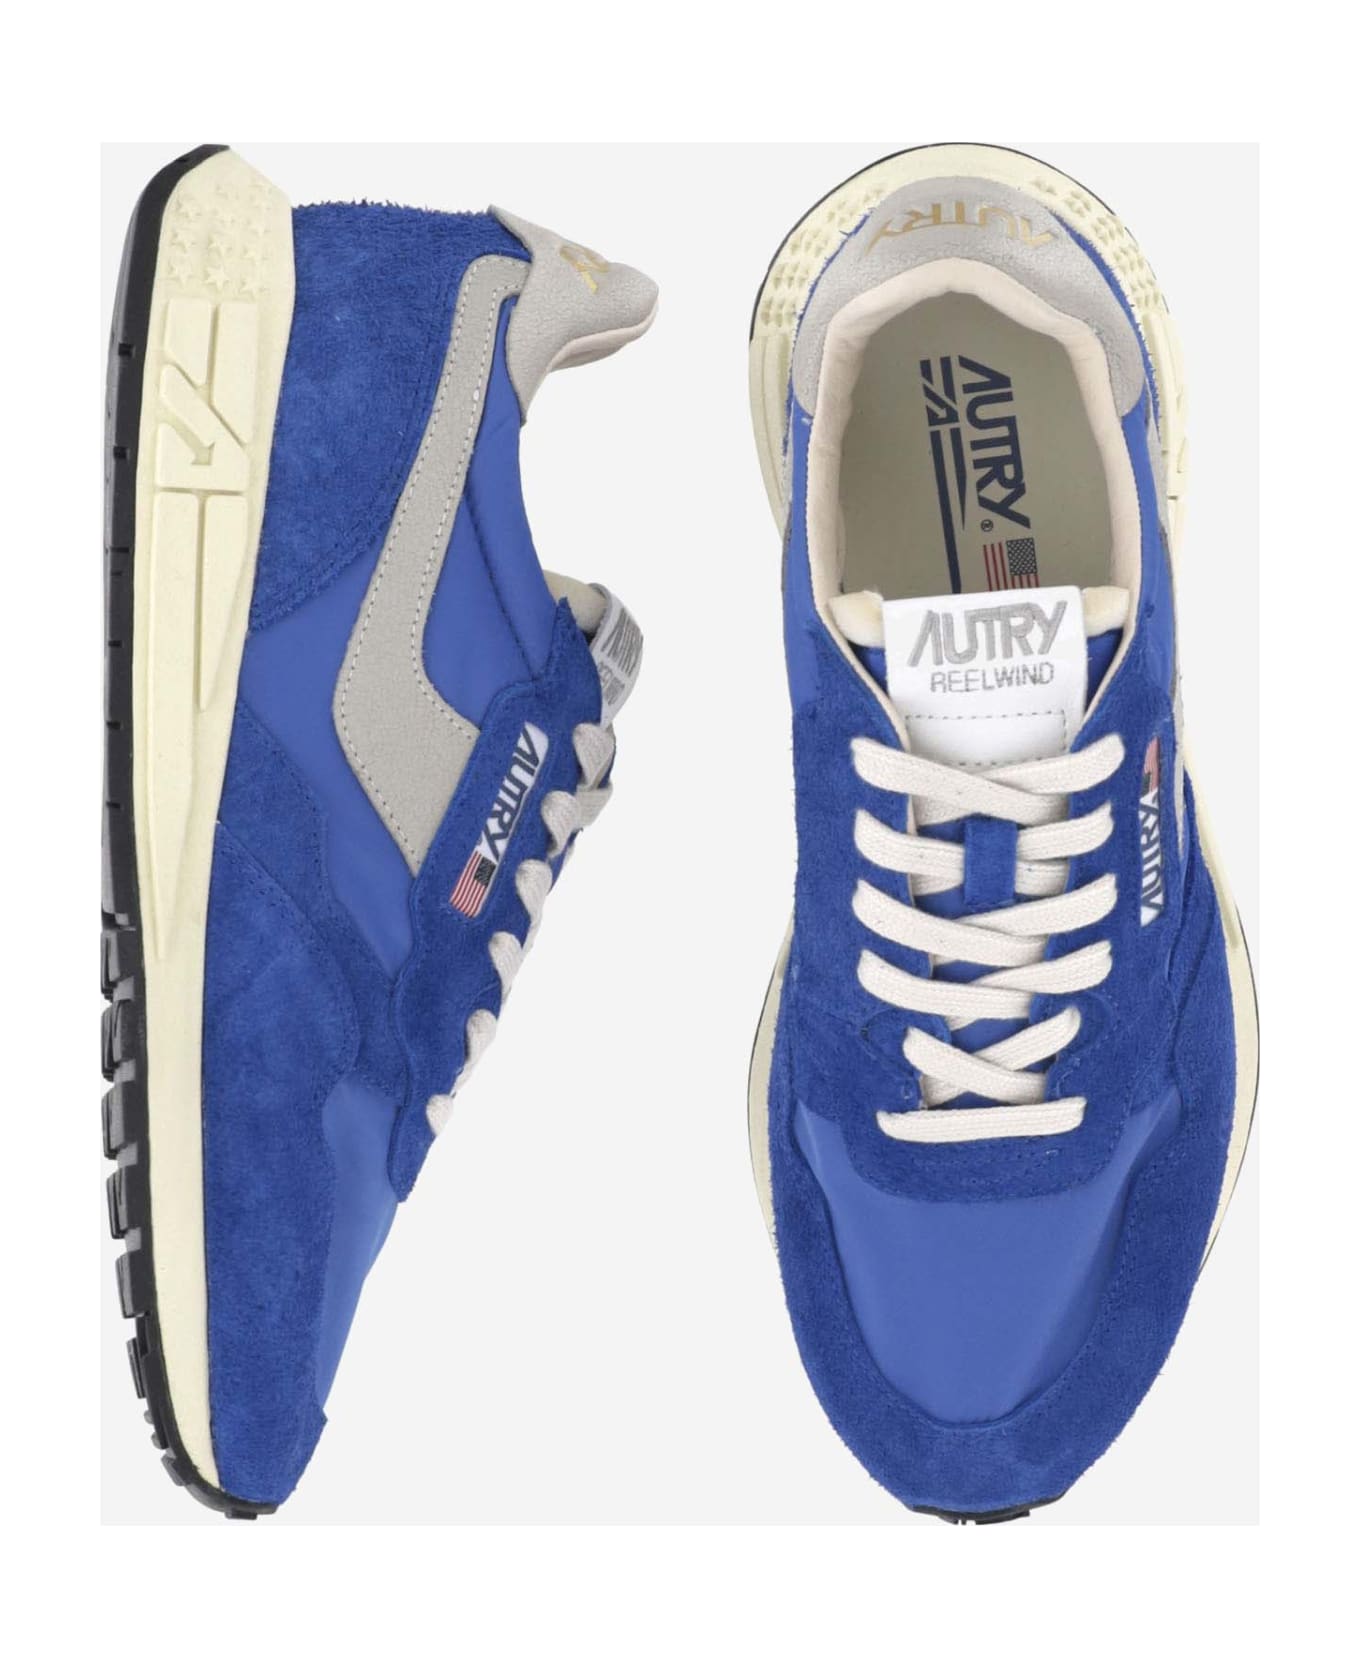 Autry Reelwind Low Nylon And Suede Sneakers - Blue